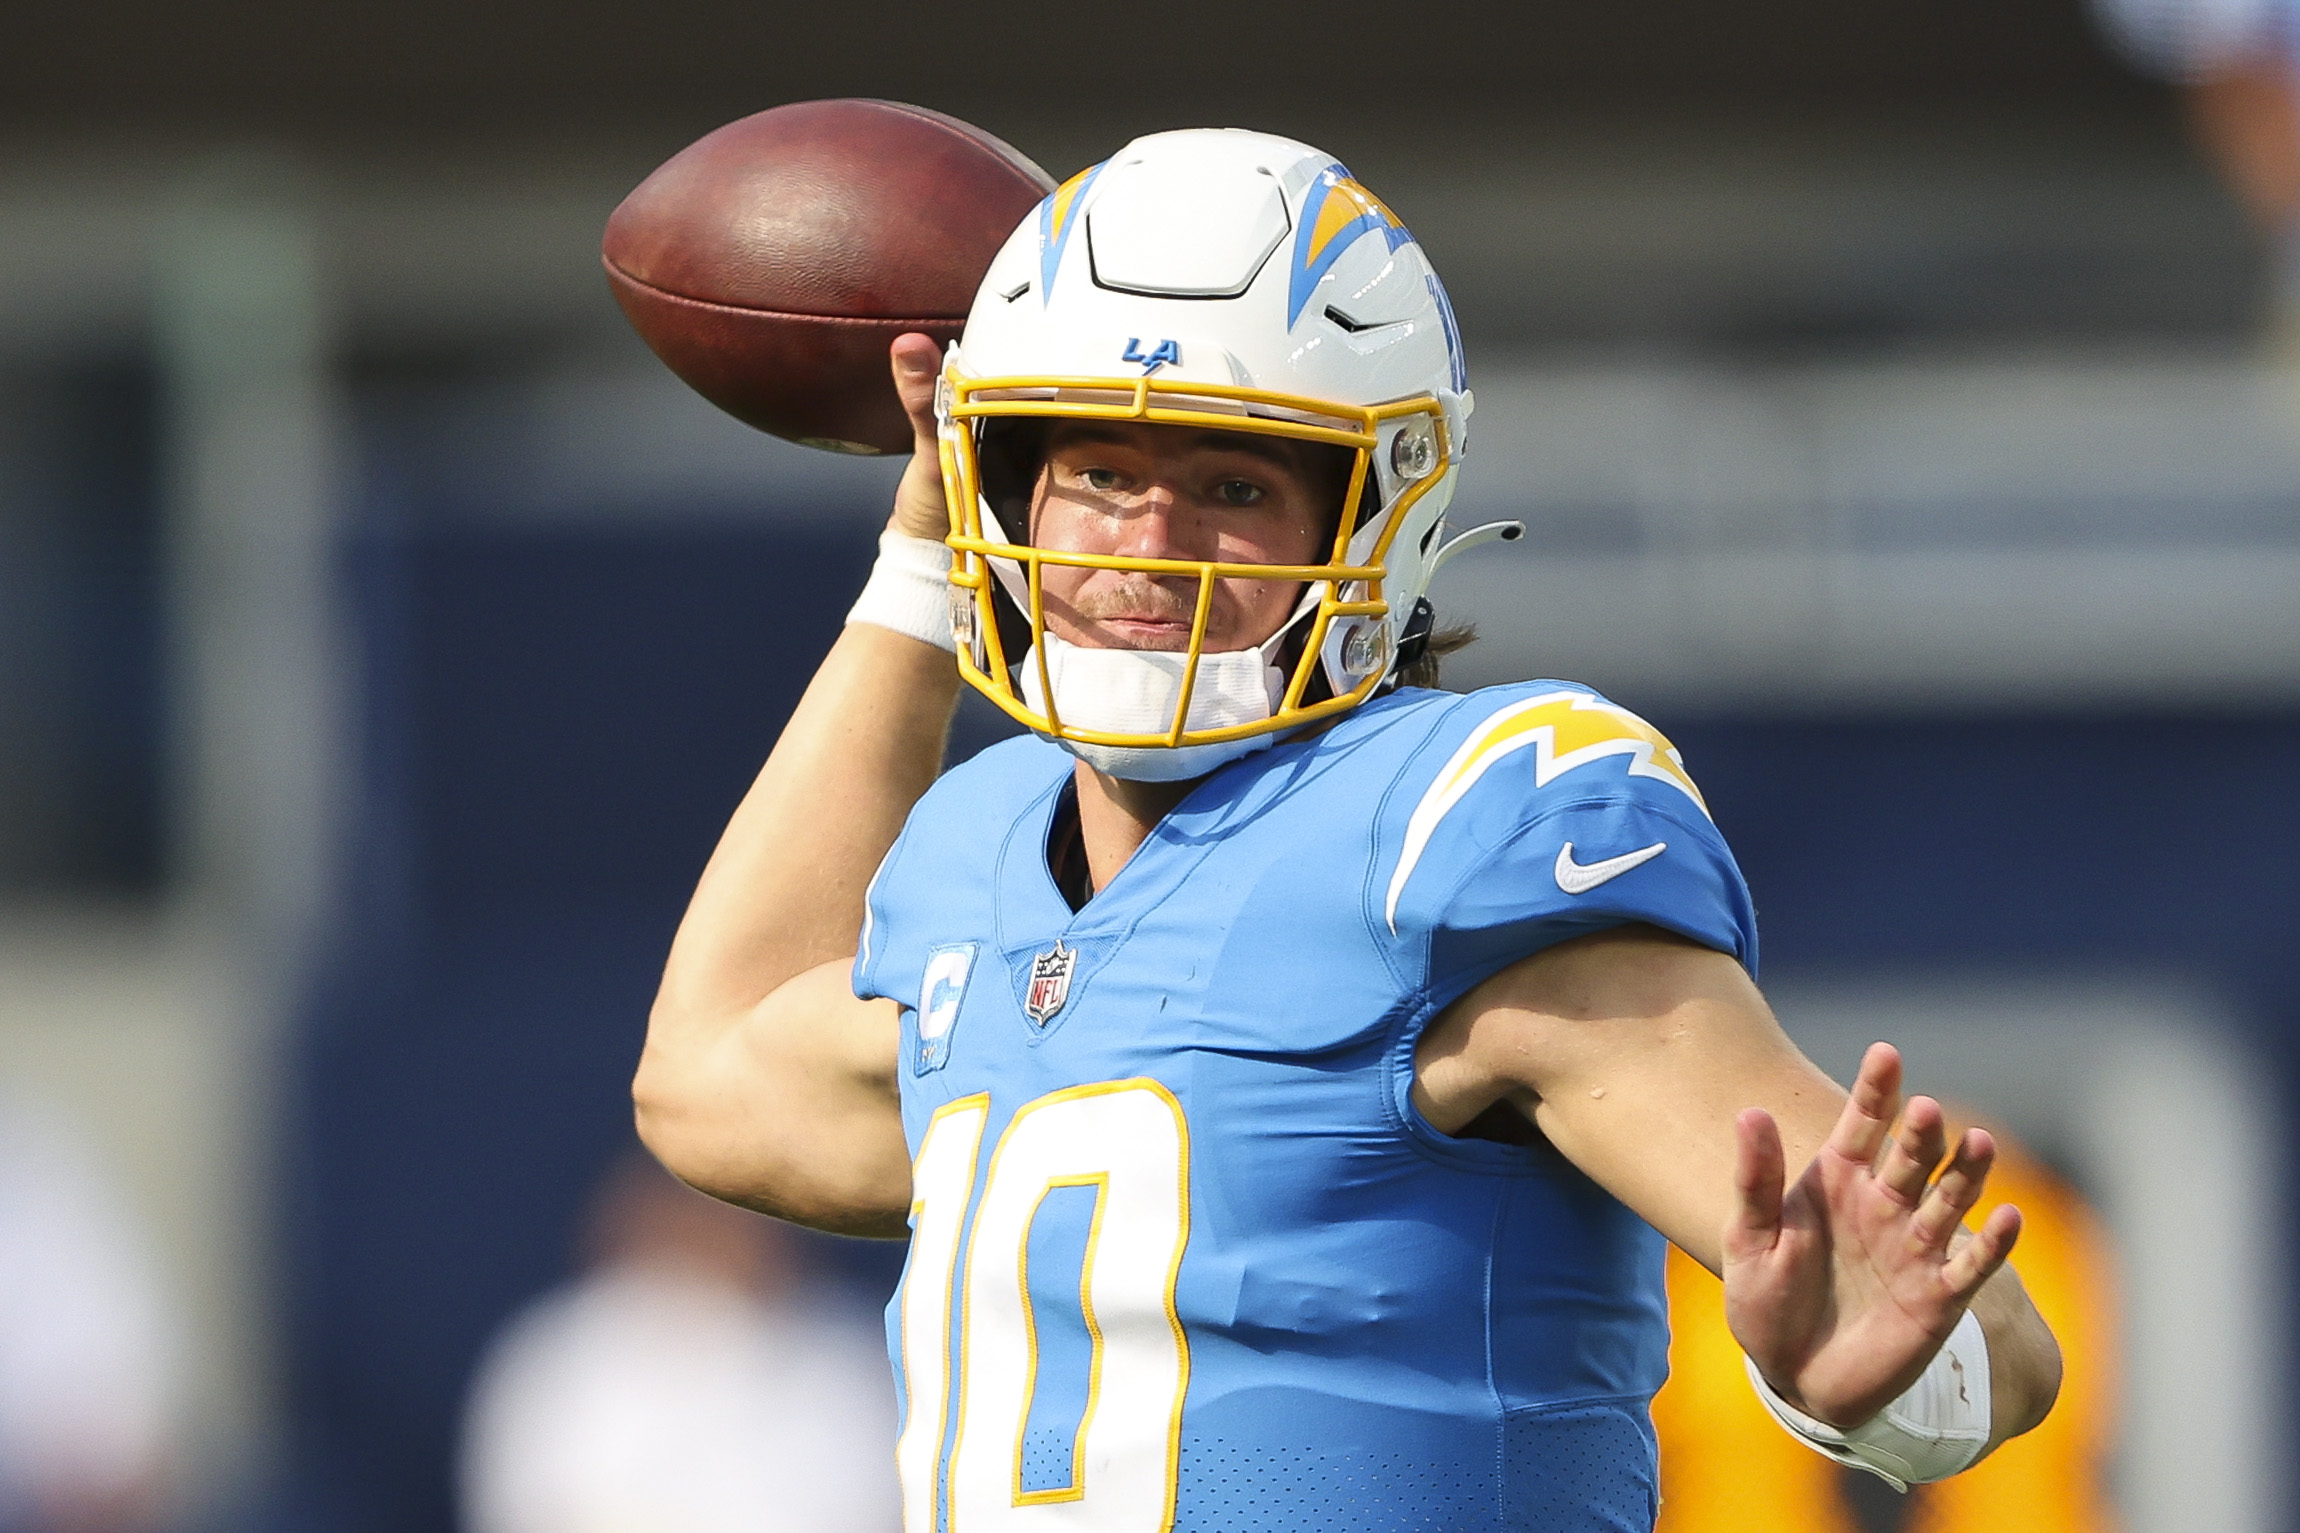 Justin Herbert #10 of the Los Angeles Chargers attempts a pass during the second half against the Jacksonville Jaguars at SoFi Stadium on September 25, 2022 in Inglewood, California.